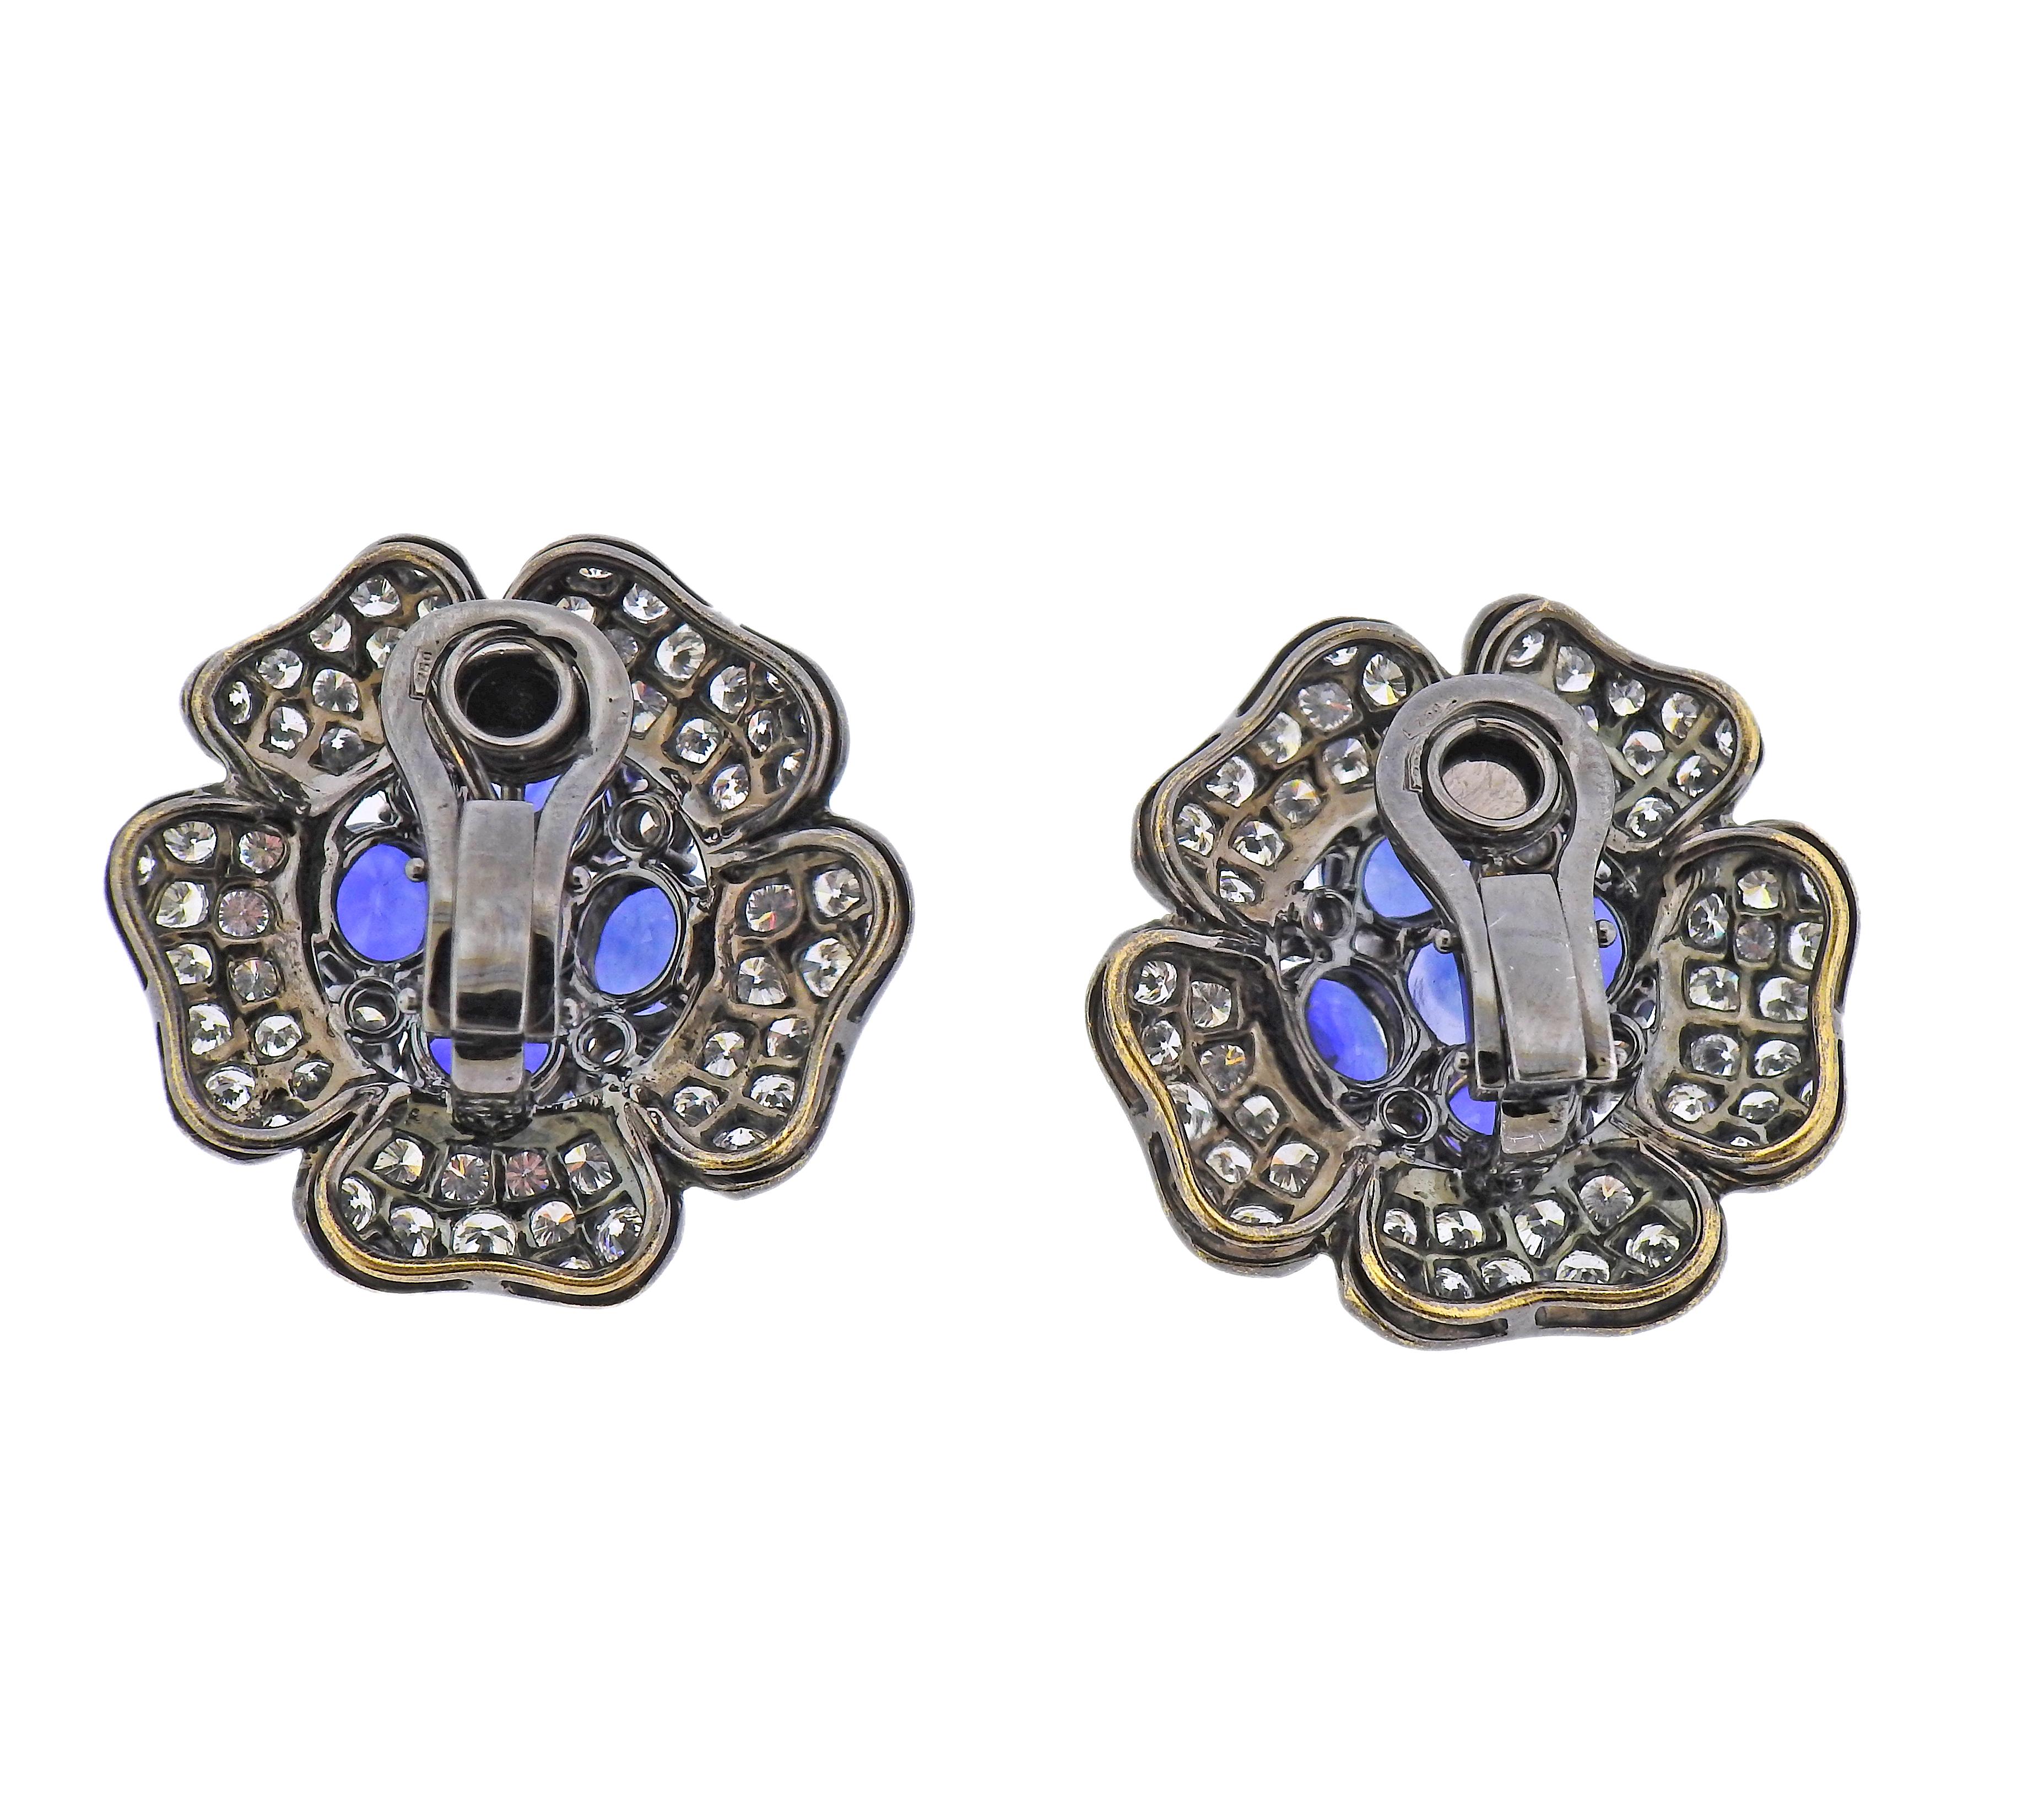 Pair of 18k blackened white gold flower earrings, set with blue sapphires and approx. 5.00ctw in diamonds. Earrings measure 29mm x 29mm. Marked: 750. Weight - 25.9 grams.